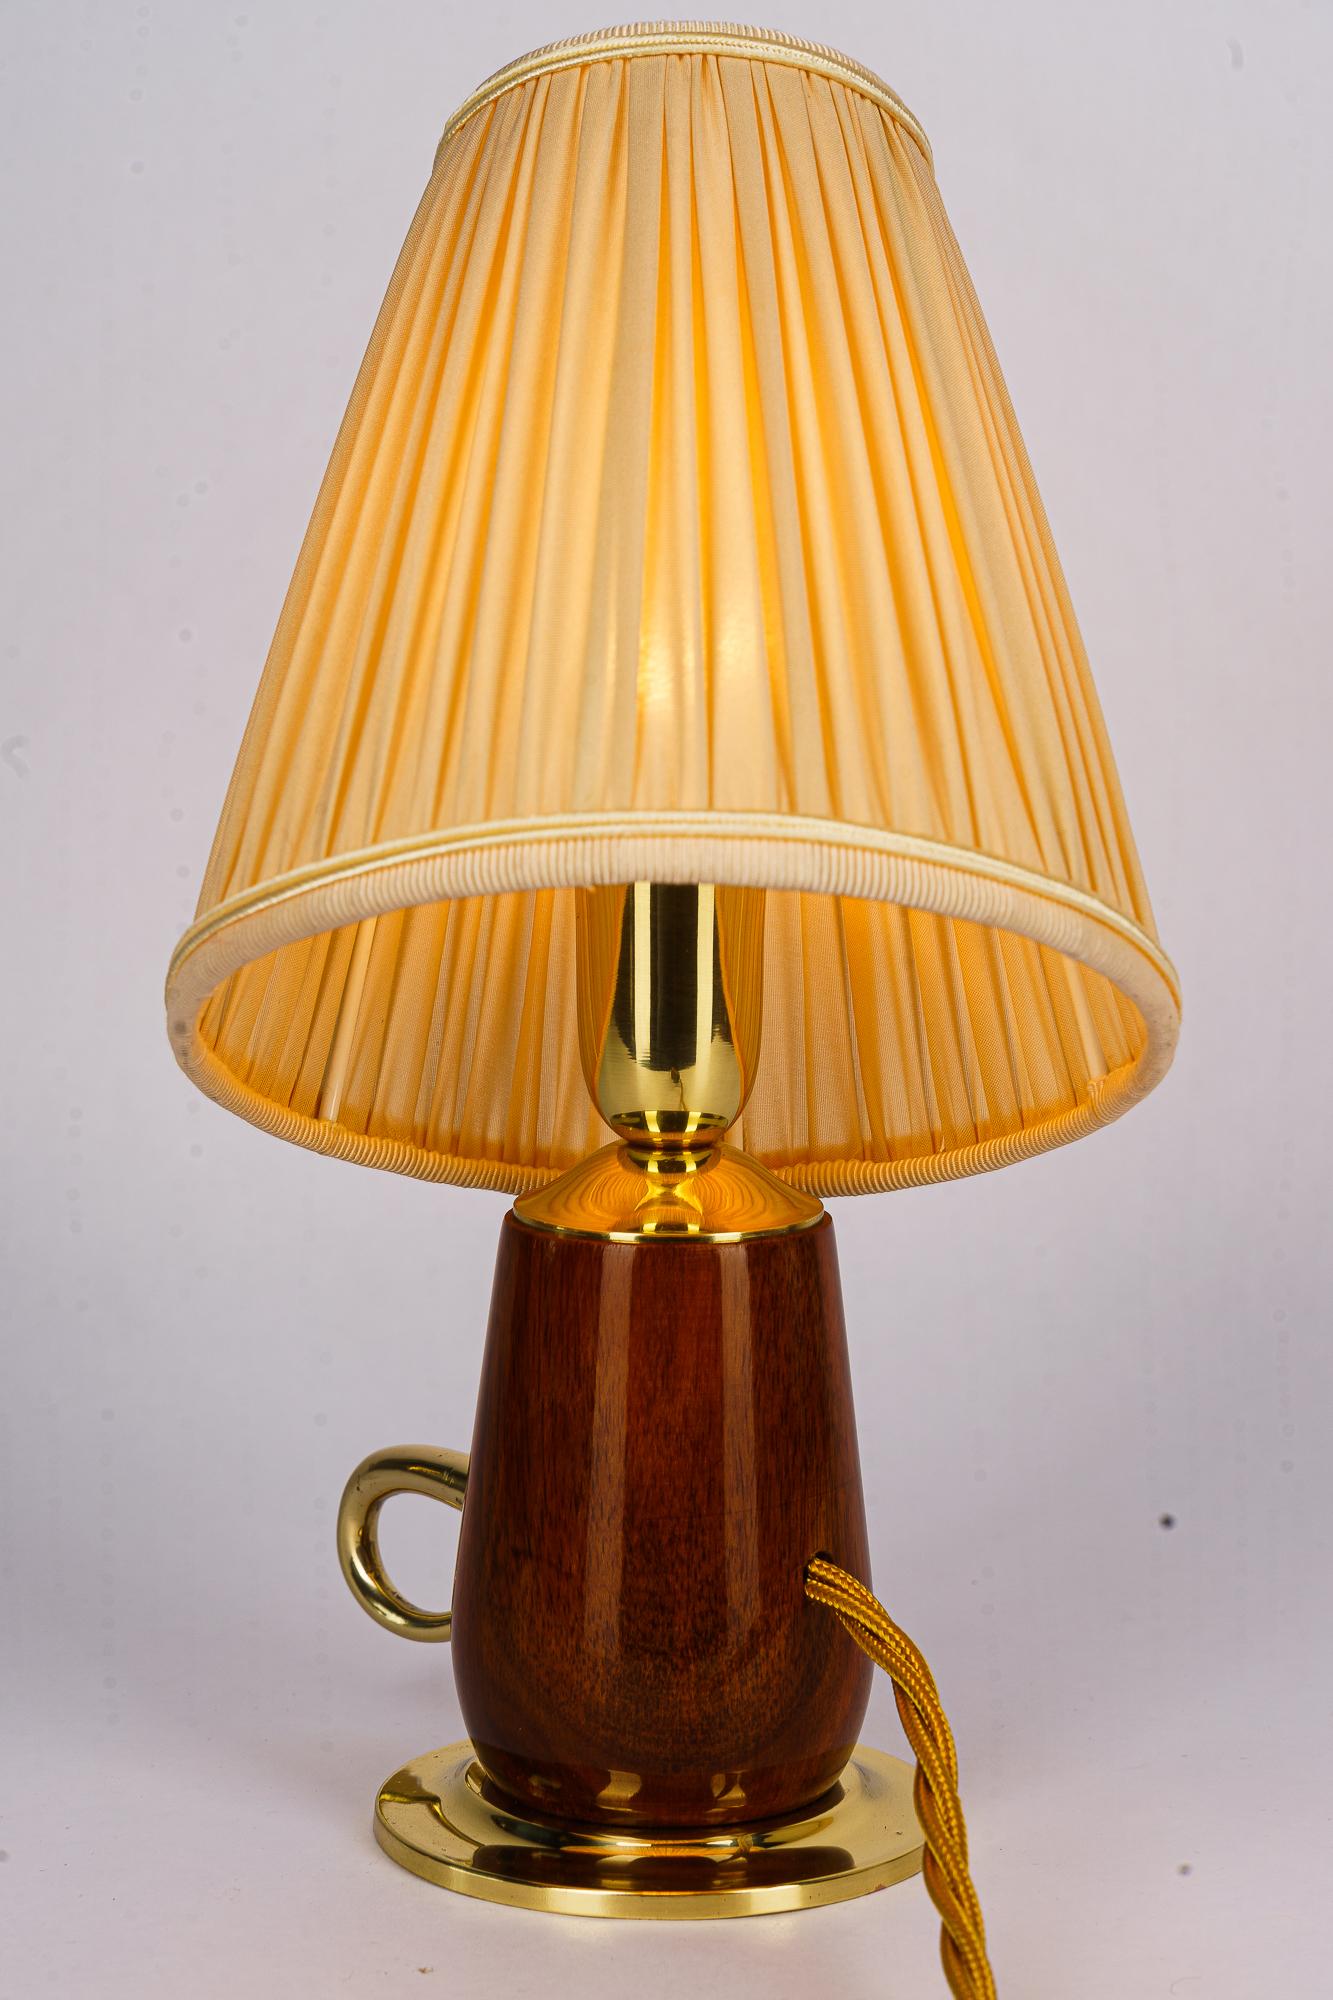 Rupert nikoll cherry wood table lamp with fabric shade vienna around 1950s For Sale 3